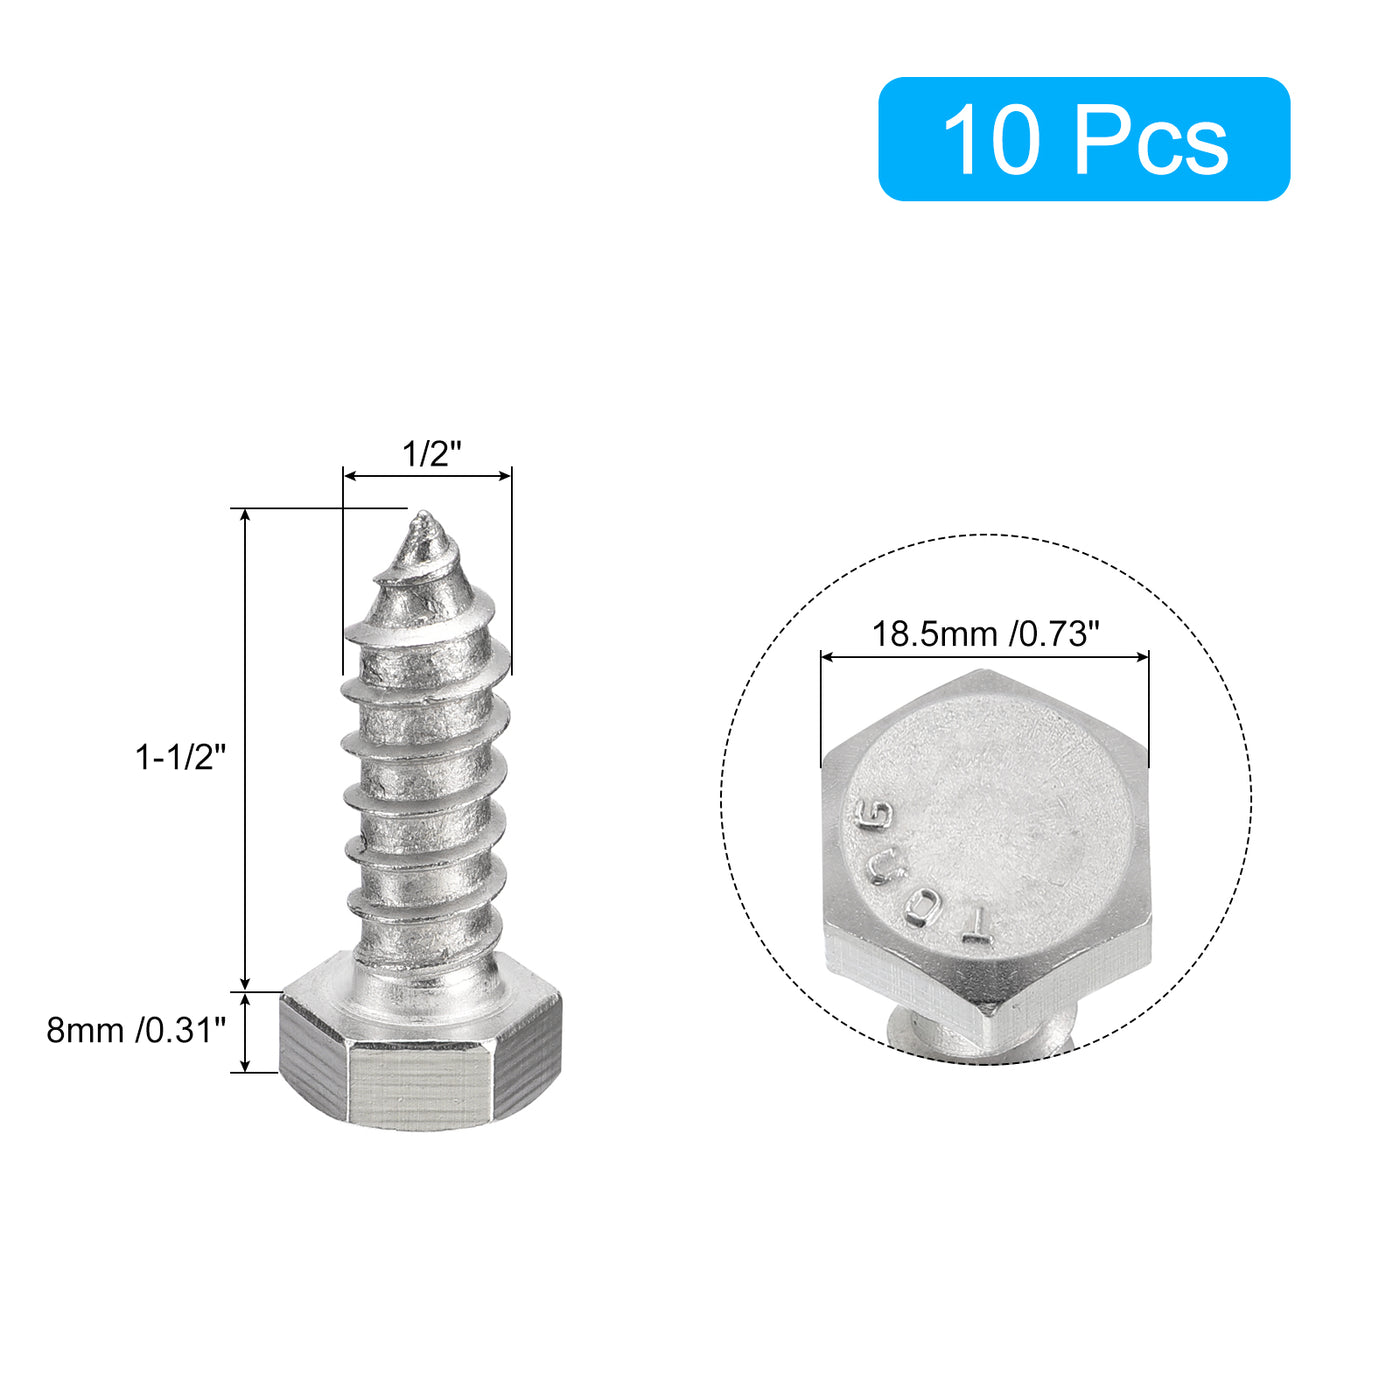 uxcell Uxcell Hex Head Lag Screws Bolts, 10pcs 1/2" x 1-1/2" 304 Stainless Steel Wood Screws